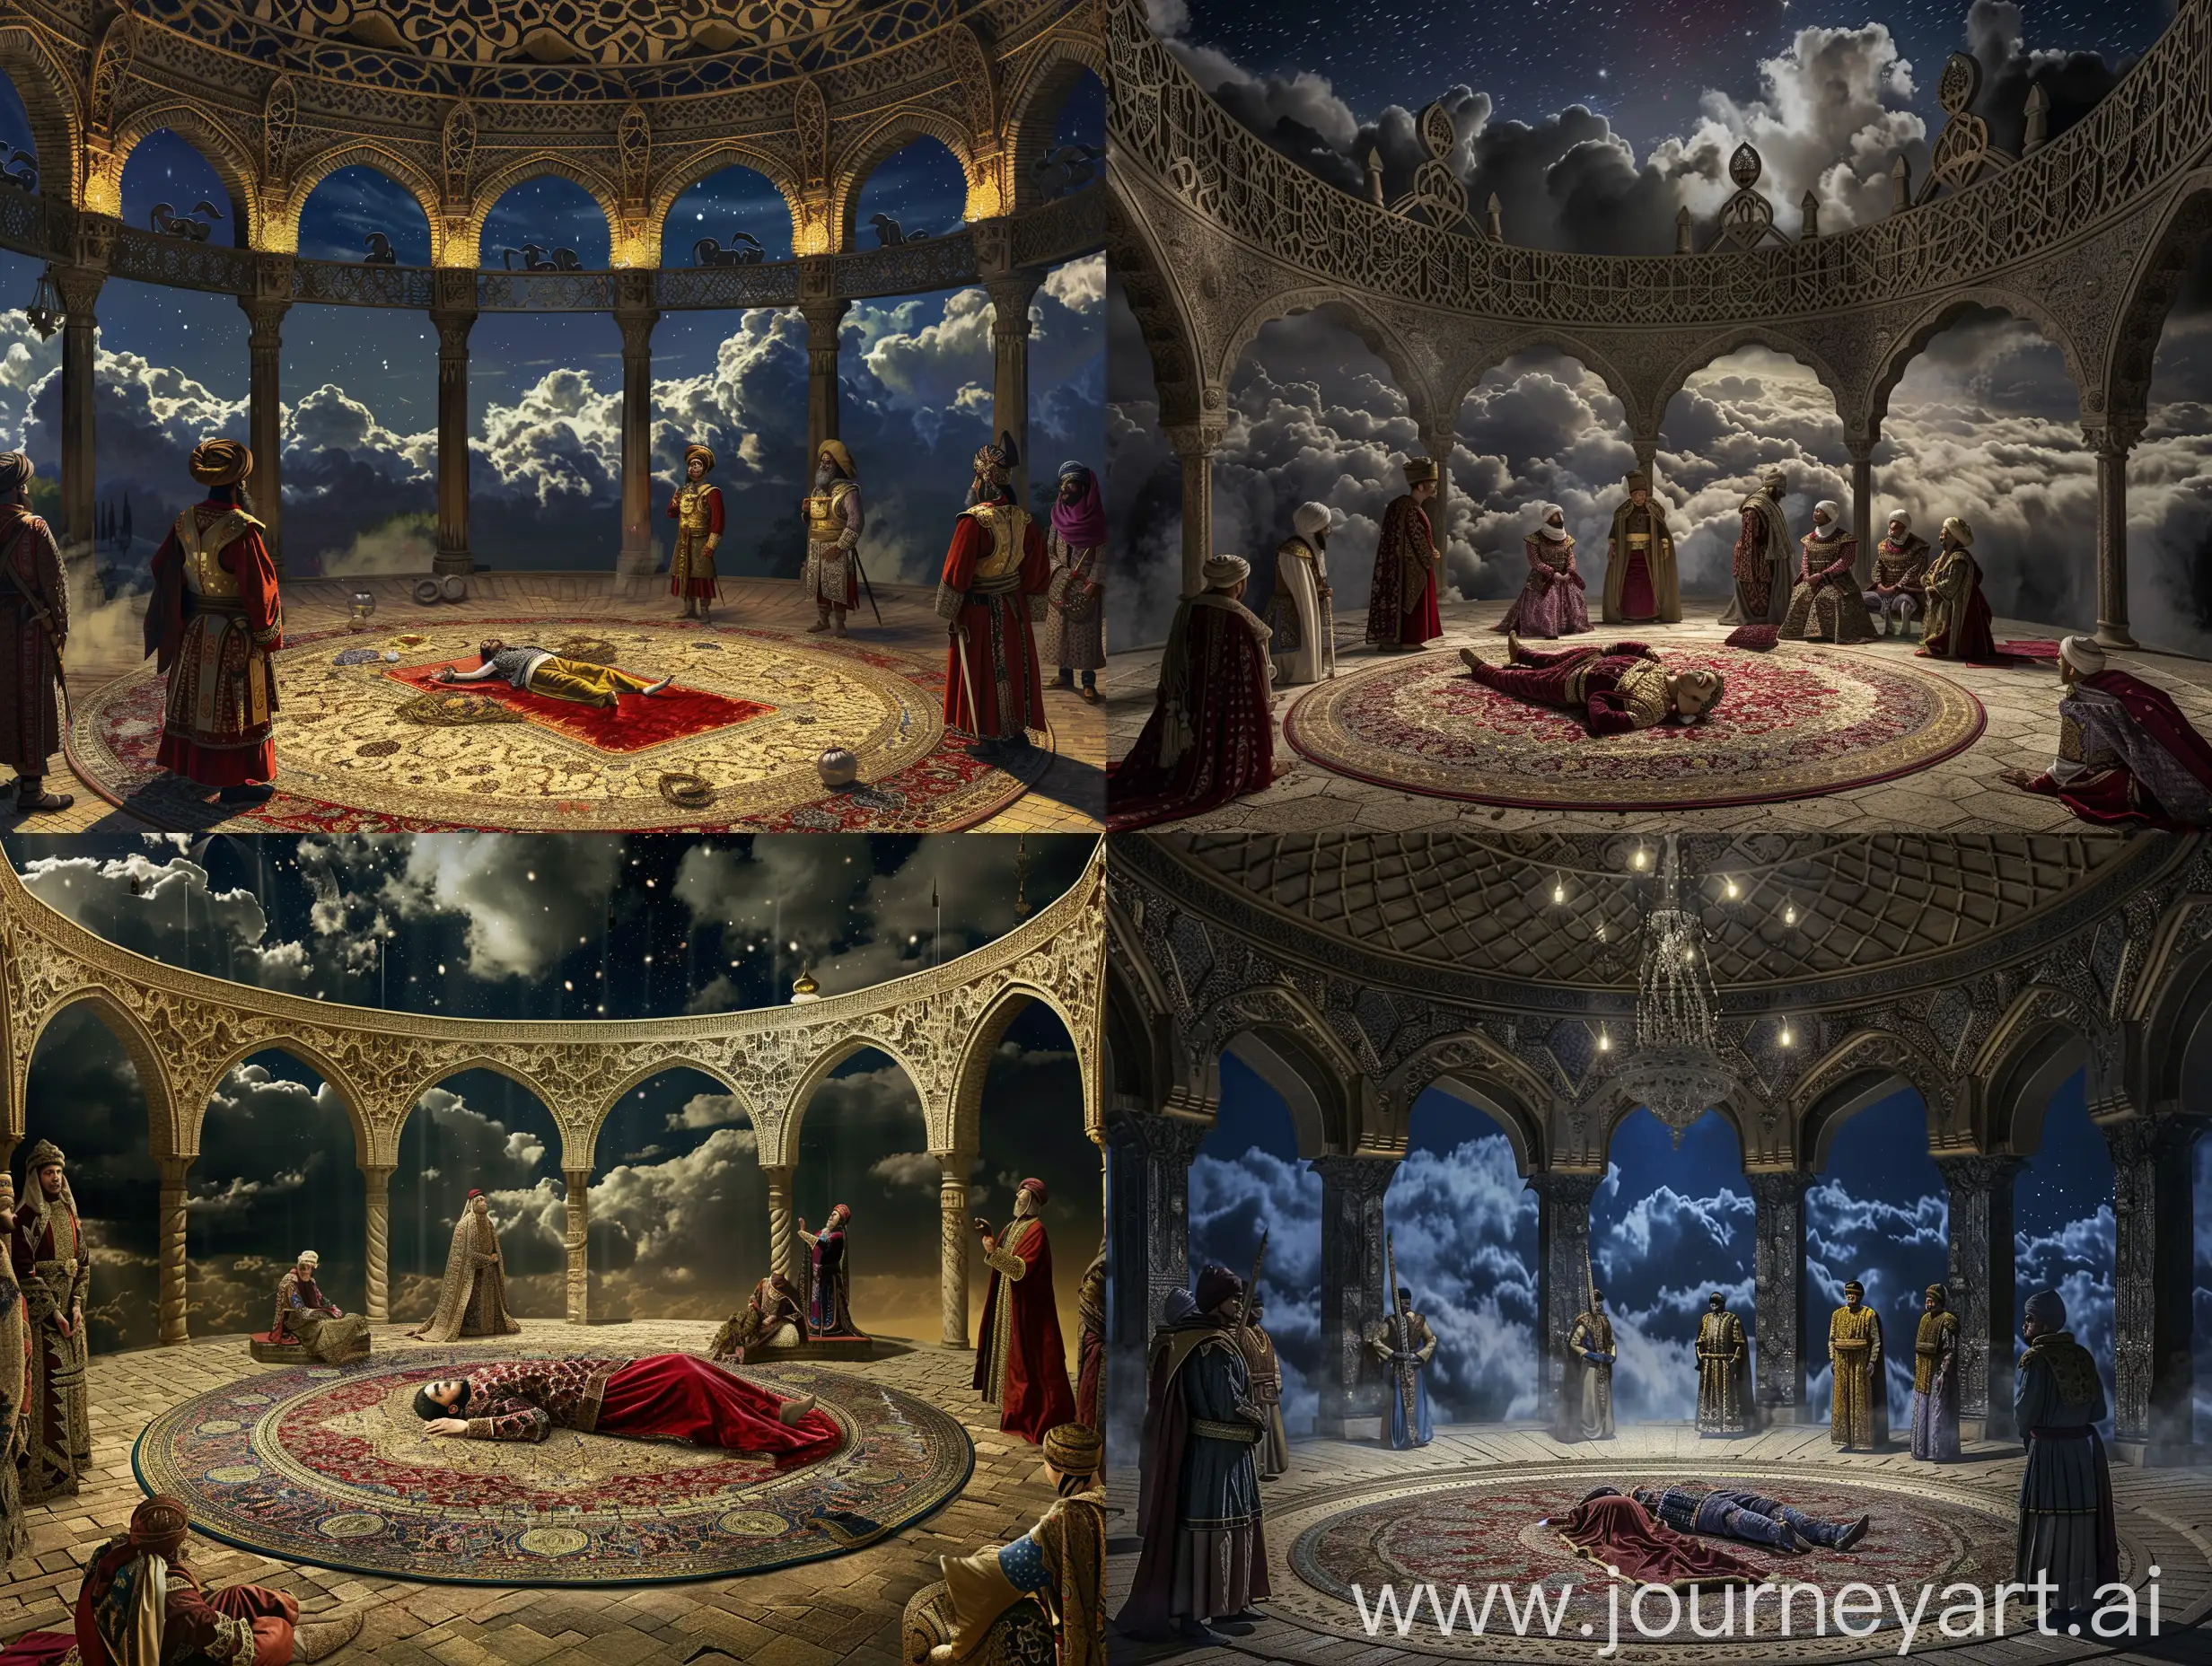 inside of a round isolated hall covered with muqarnas ceiling, a dead prince lying on the persian carpet surrounded by ottoman guards in janissary dress, Persian arches in the background, night view of clouds outside the arches